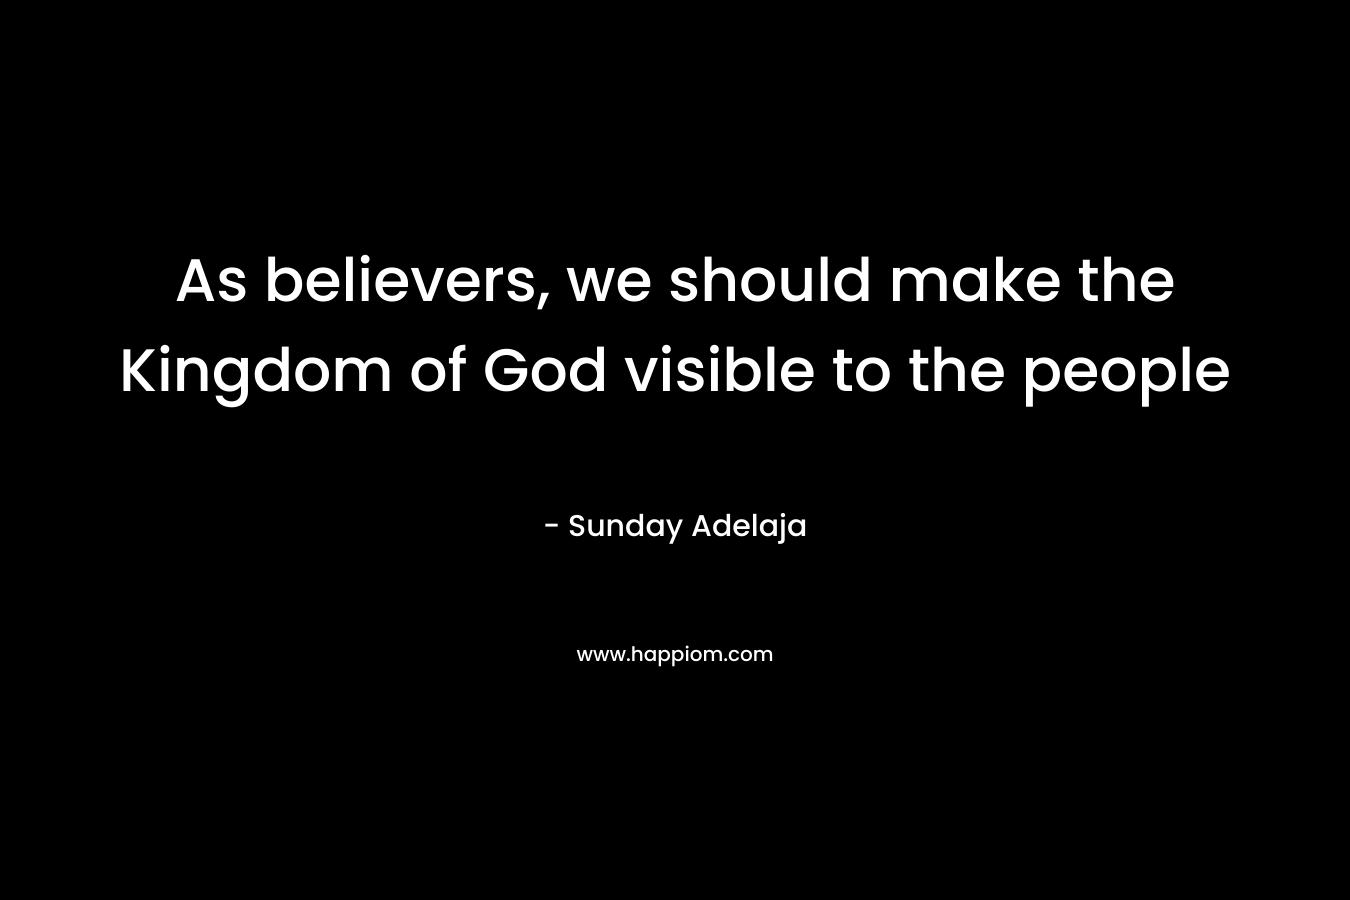 As believers, we should make the Kingdom of God visible to the people